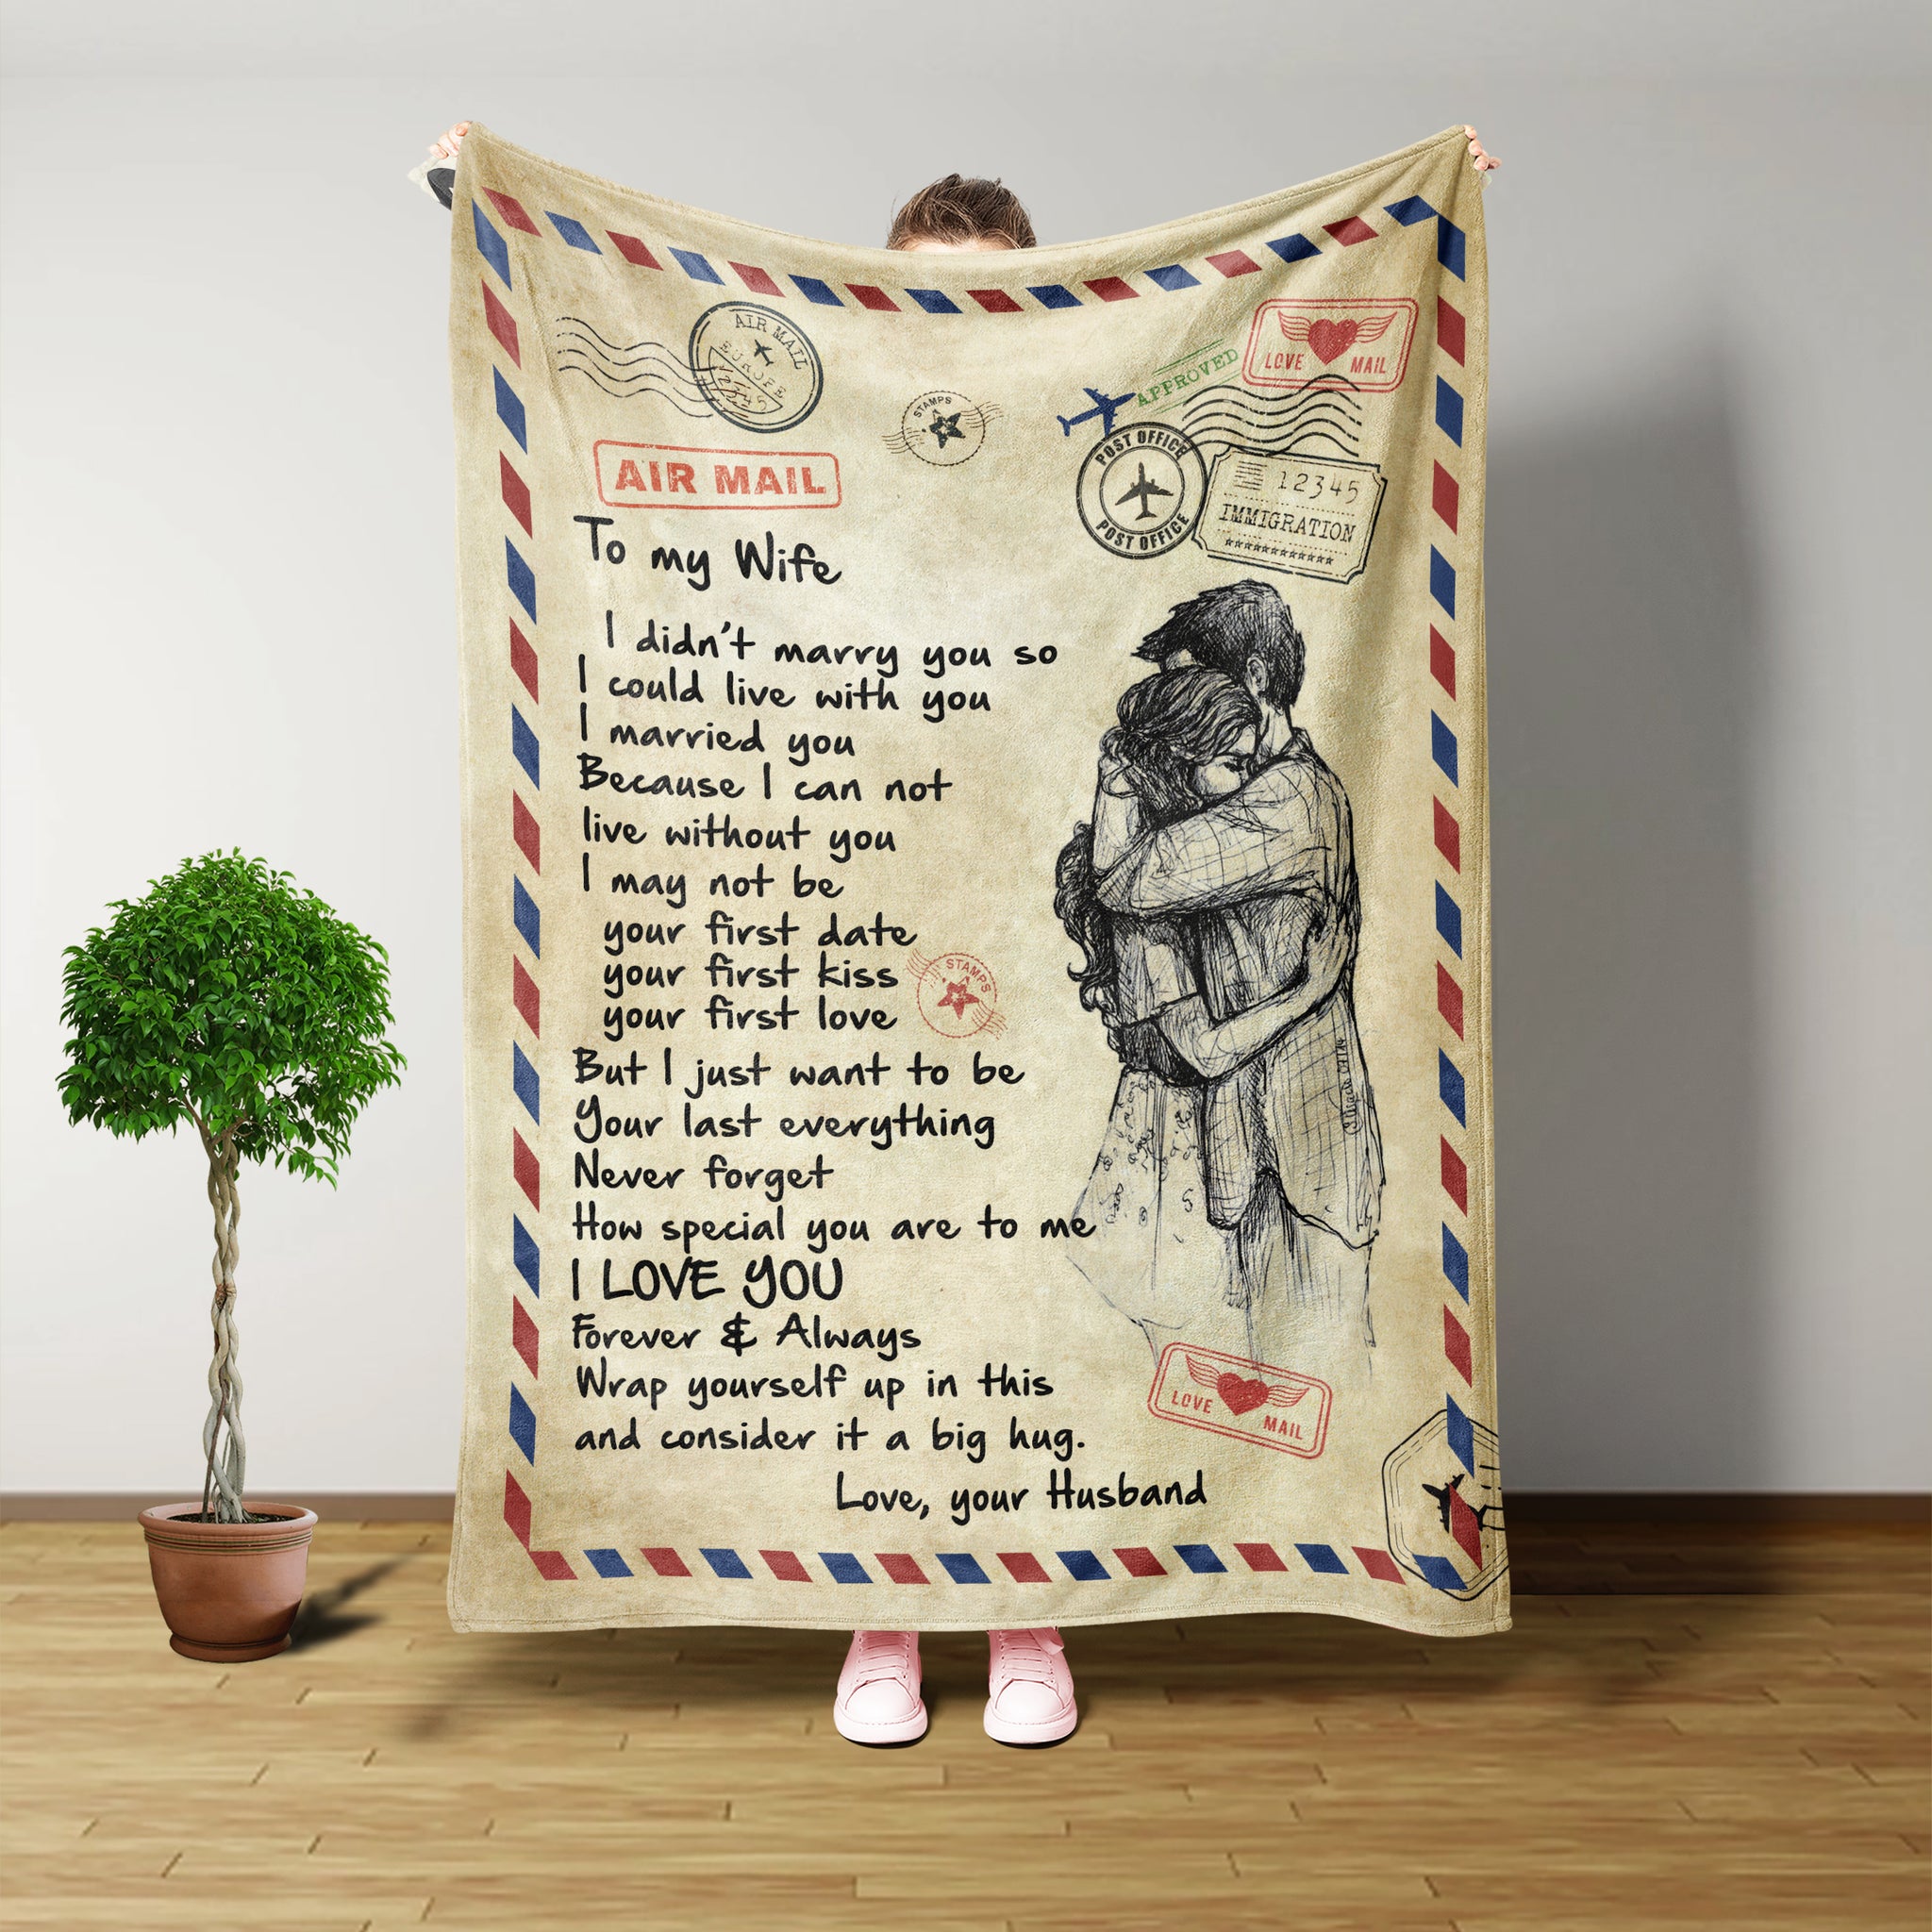 Personalised Blanket, To My Wife Blanket, Husband And Wife Quotes, Letter Blanket, Airmail, Couple Christmas Gift Ideas, Wedding Gifts, Fall Throw Blanket